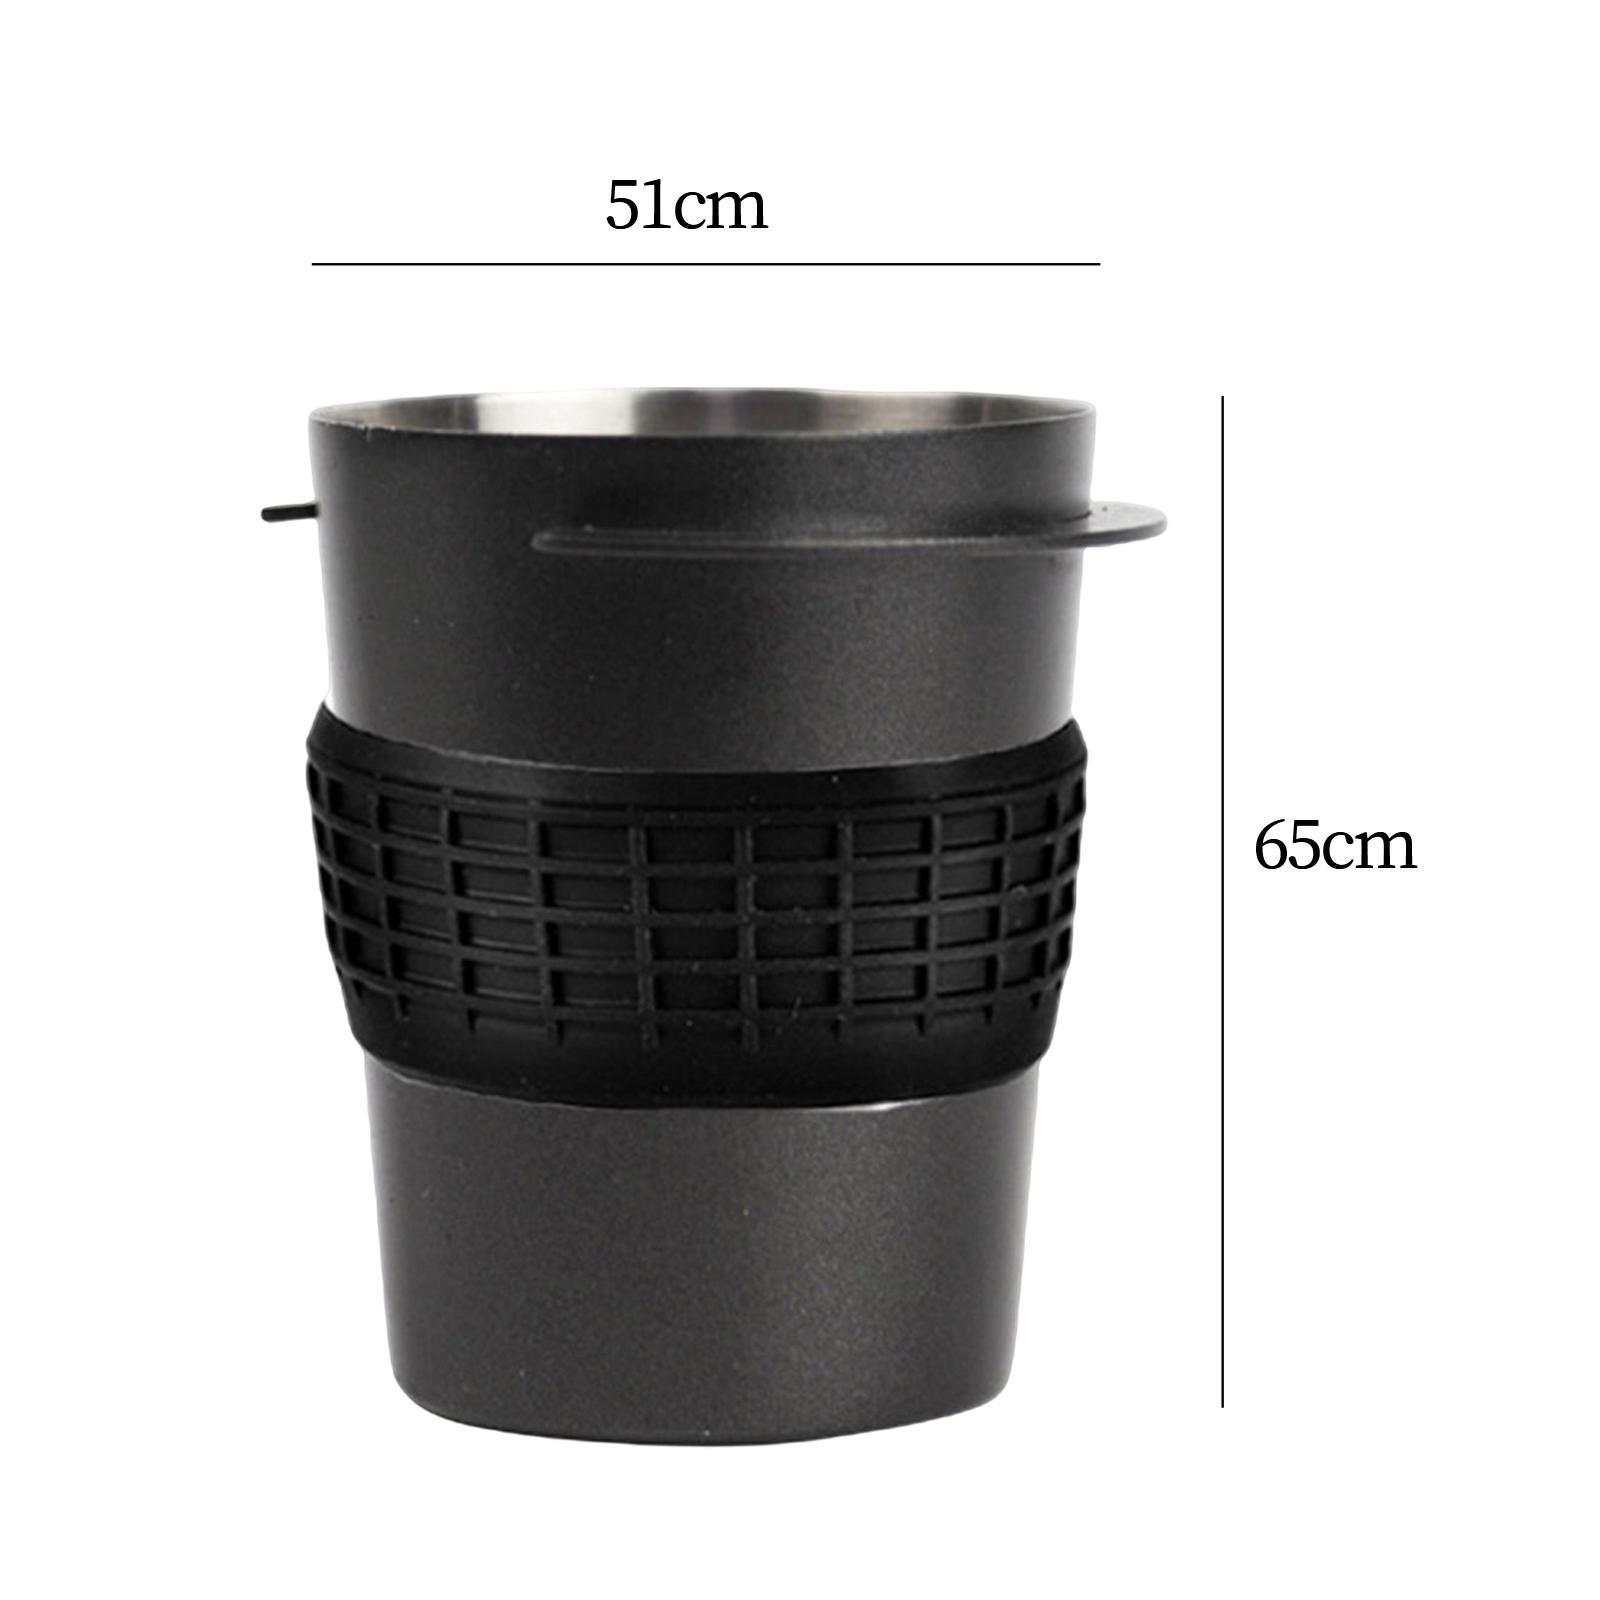 Stainless Steel Espresso Dosing Cup Coffee Powder Feeder Part for 51mm Portafilter